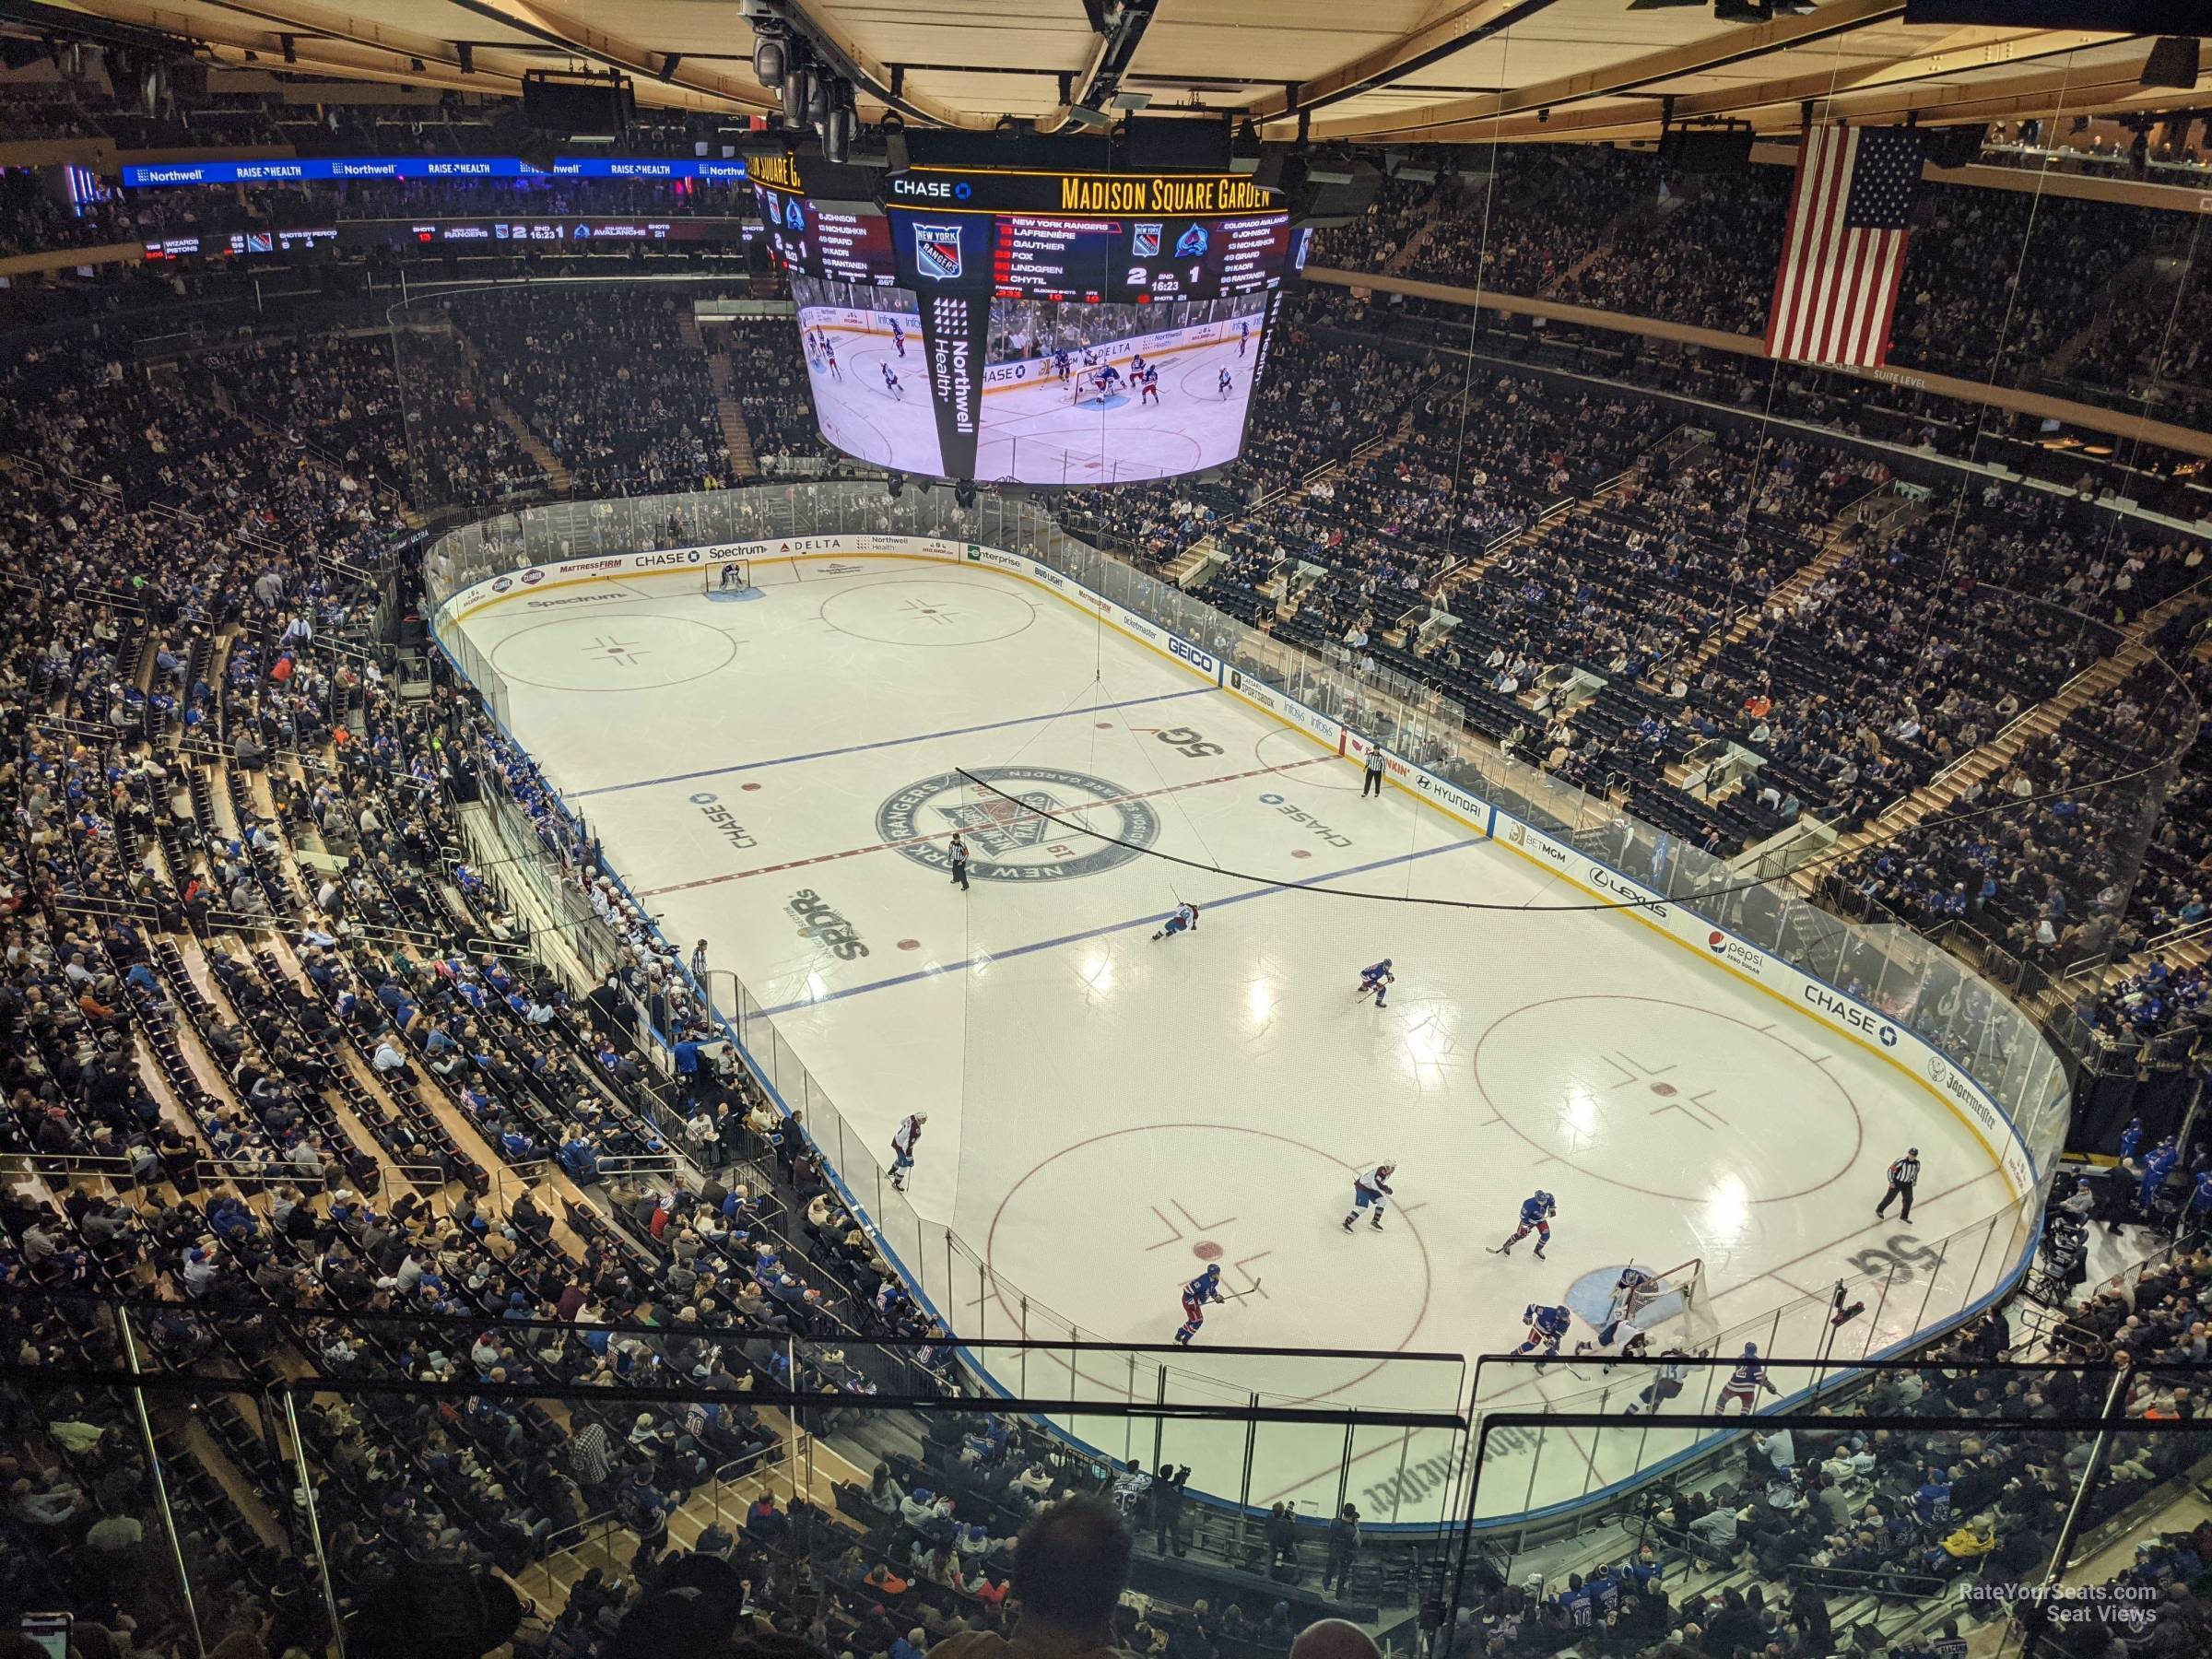 ESL One NY comes to Madison Square Garden